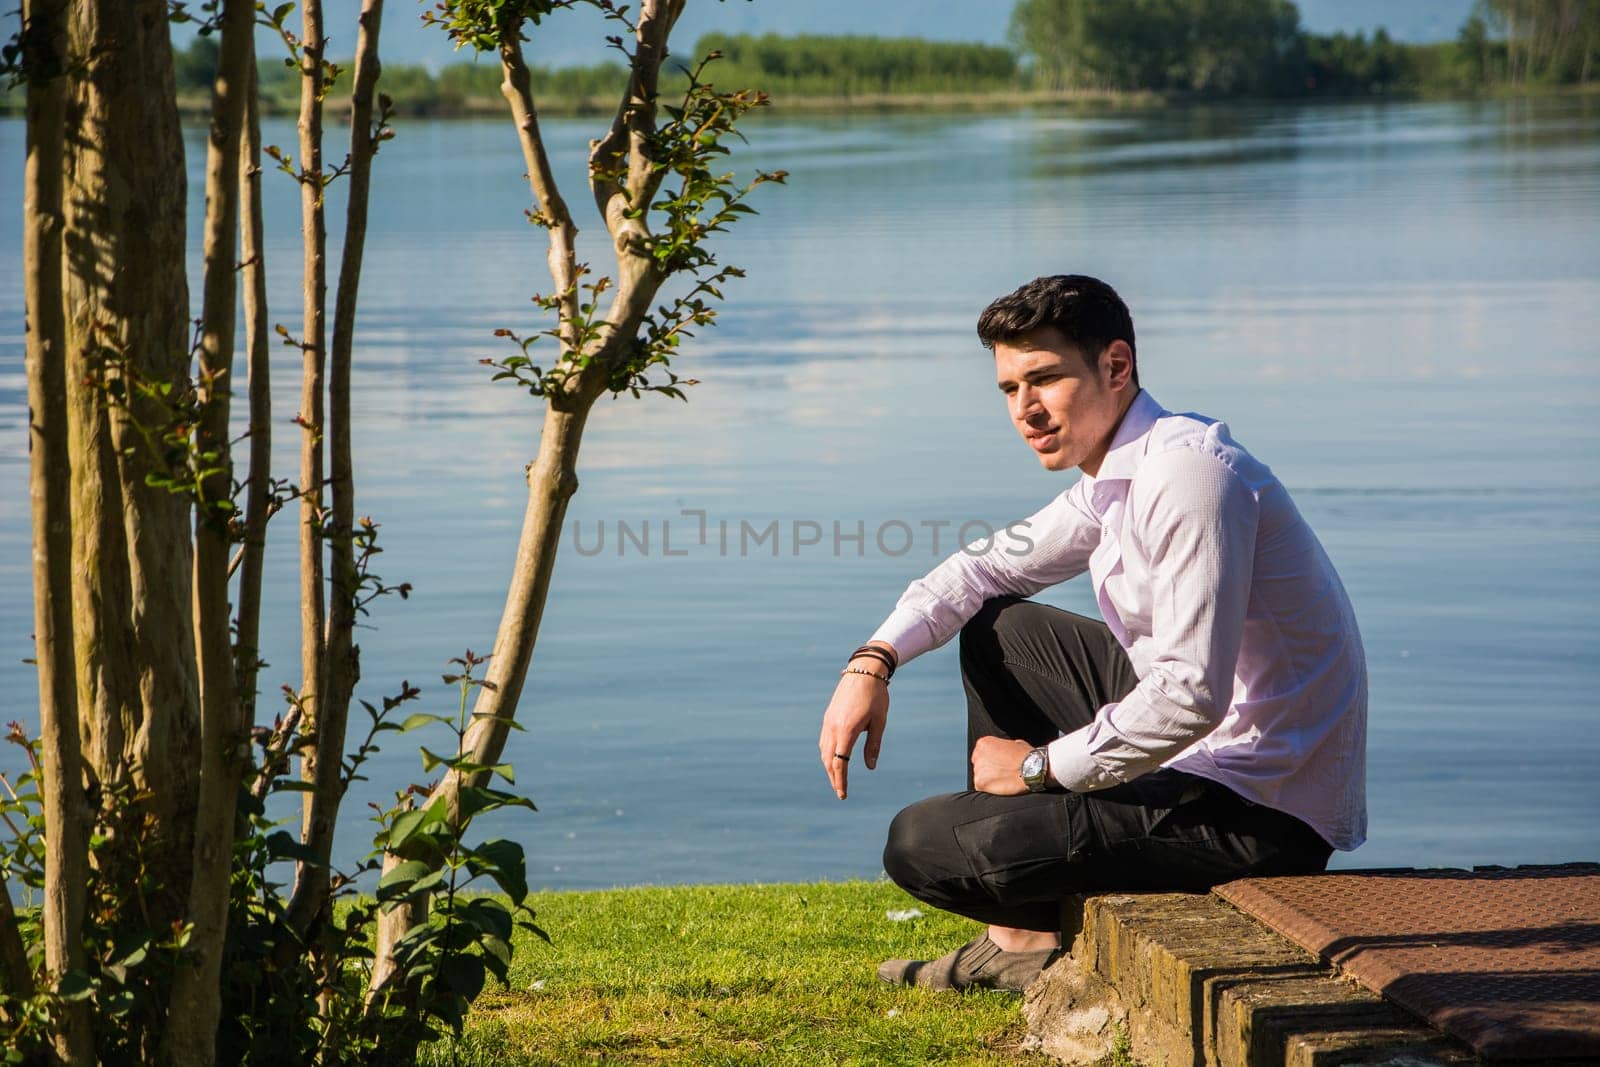 A man sitting on a bench next to a body of water. Photo of a man sitting on a bench by the water's edge